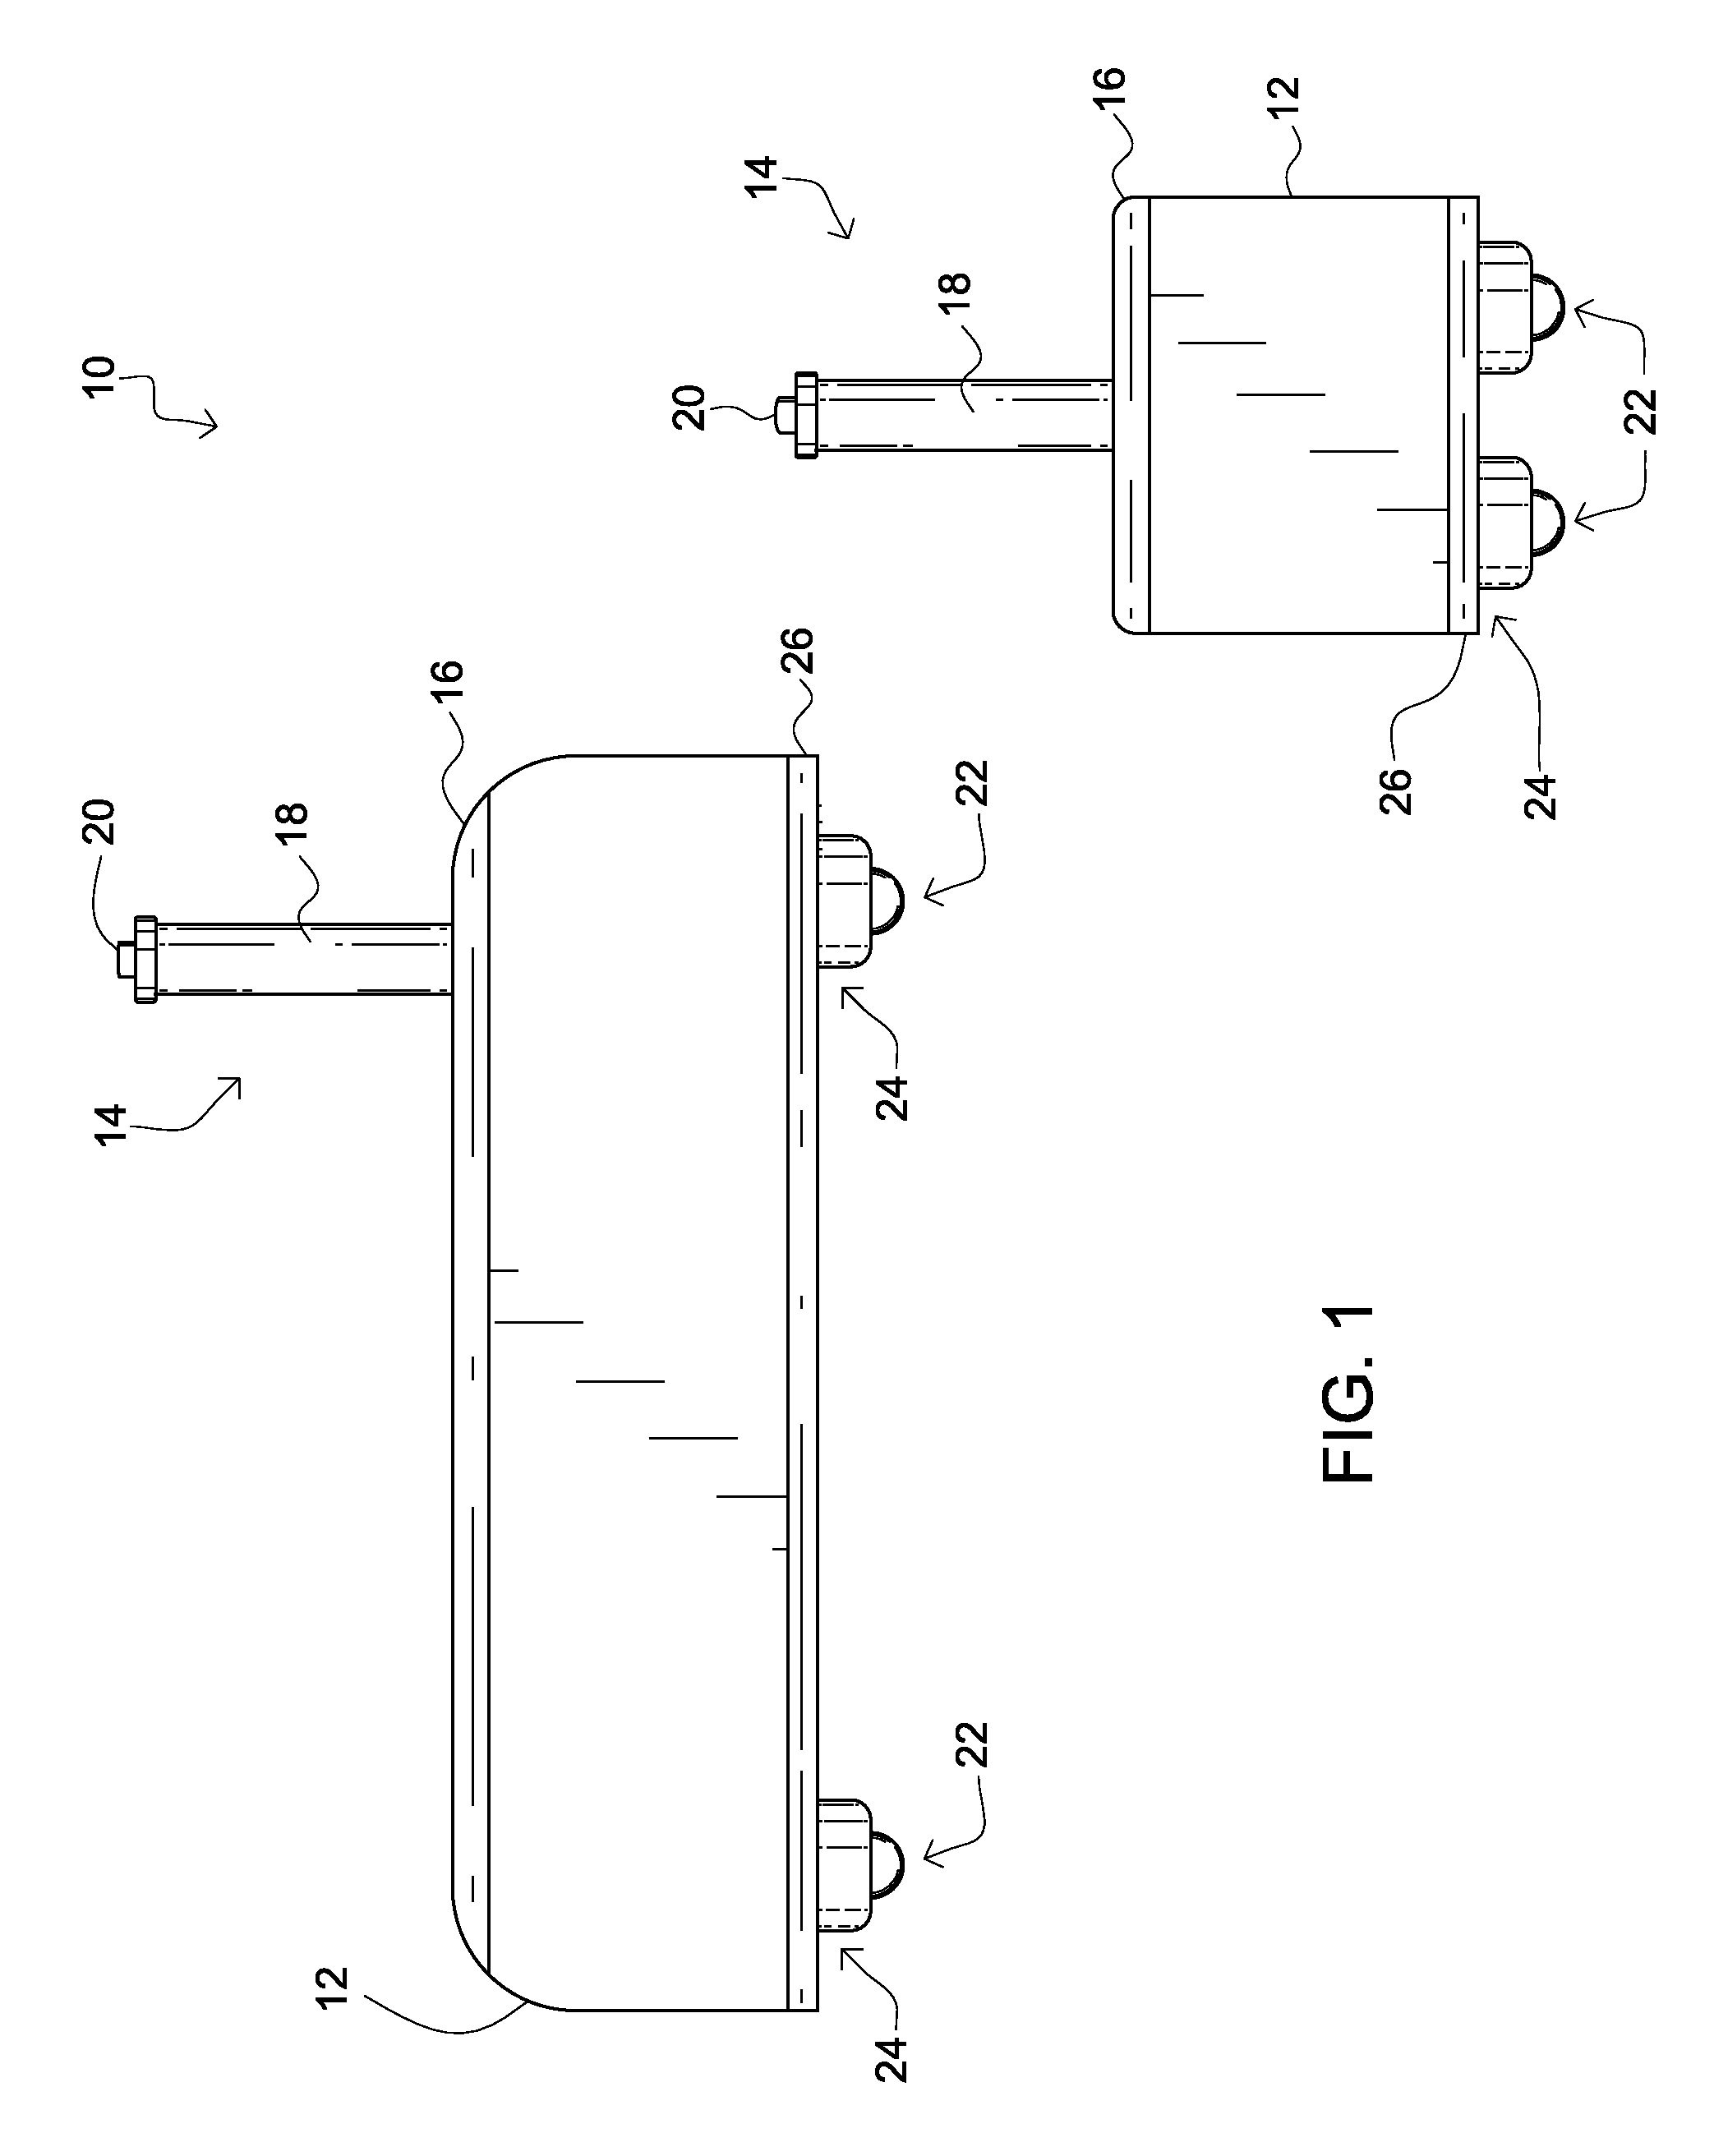 Exercise device and method of use